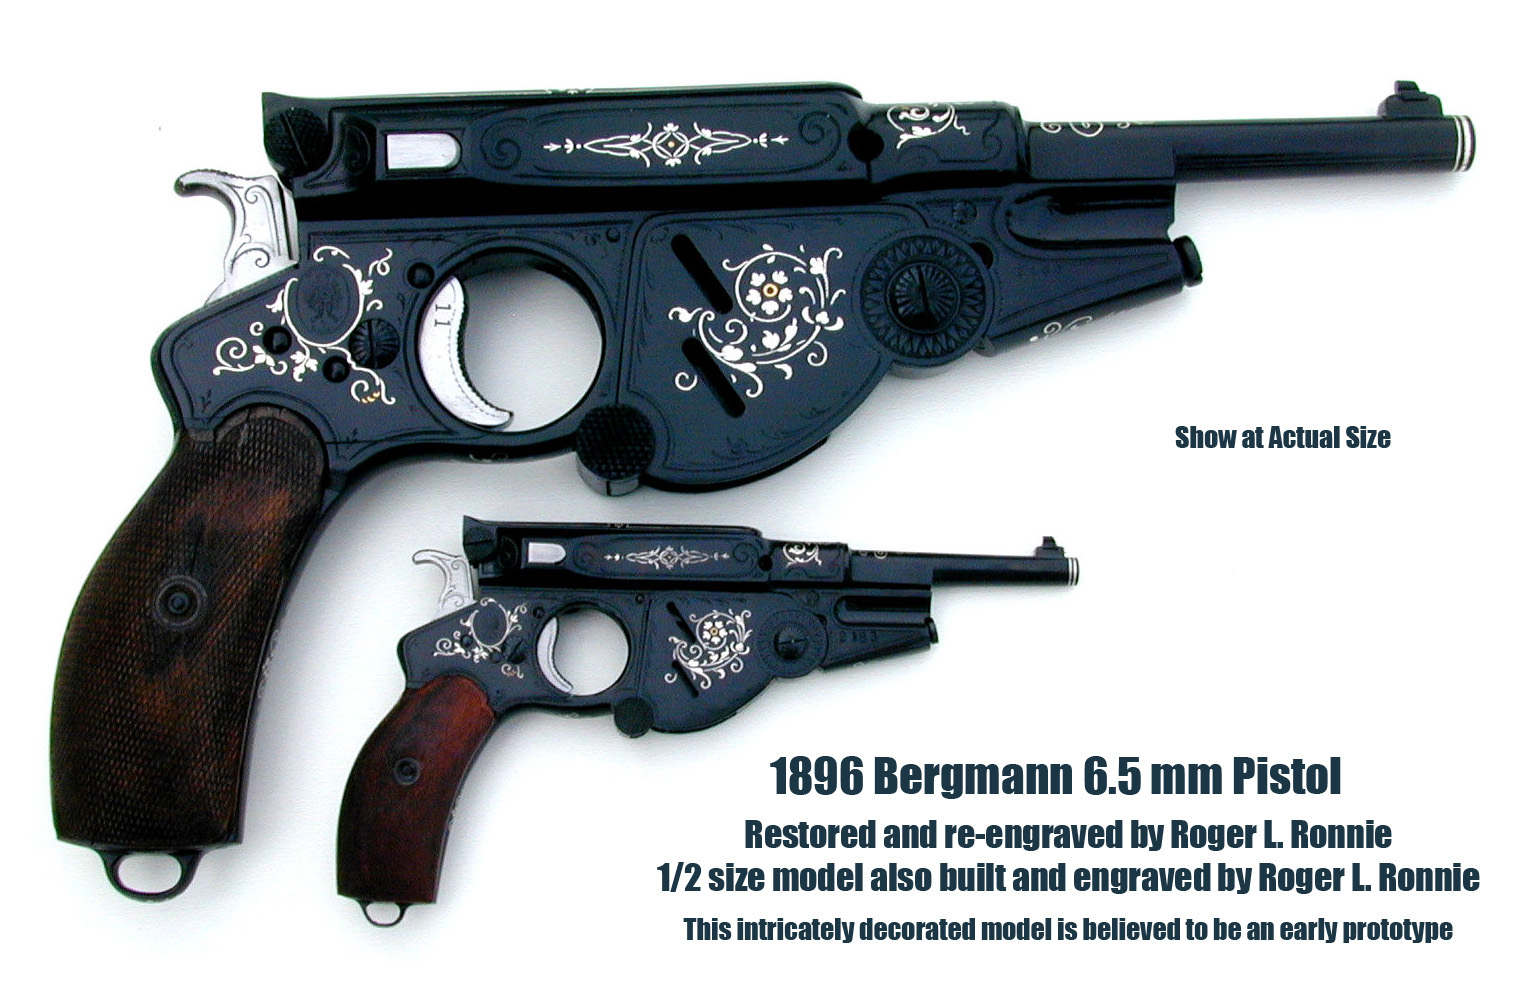 Roger's finished Bergmann pistol's, both full-size and 1/2 scale. 